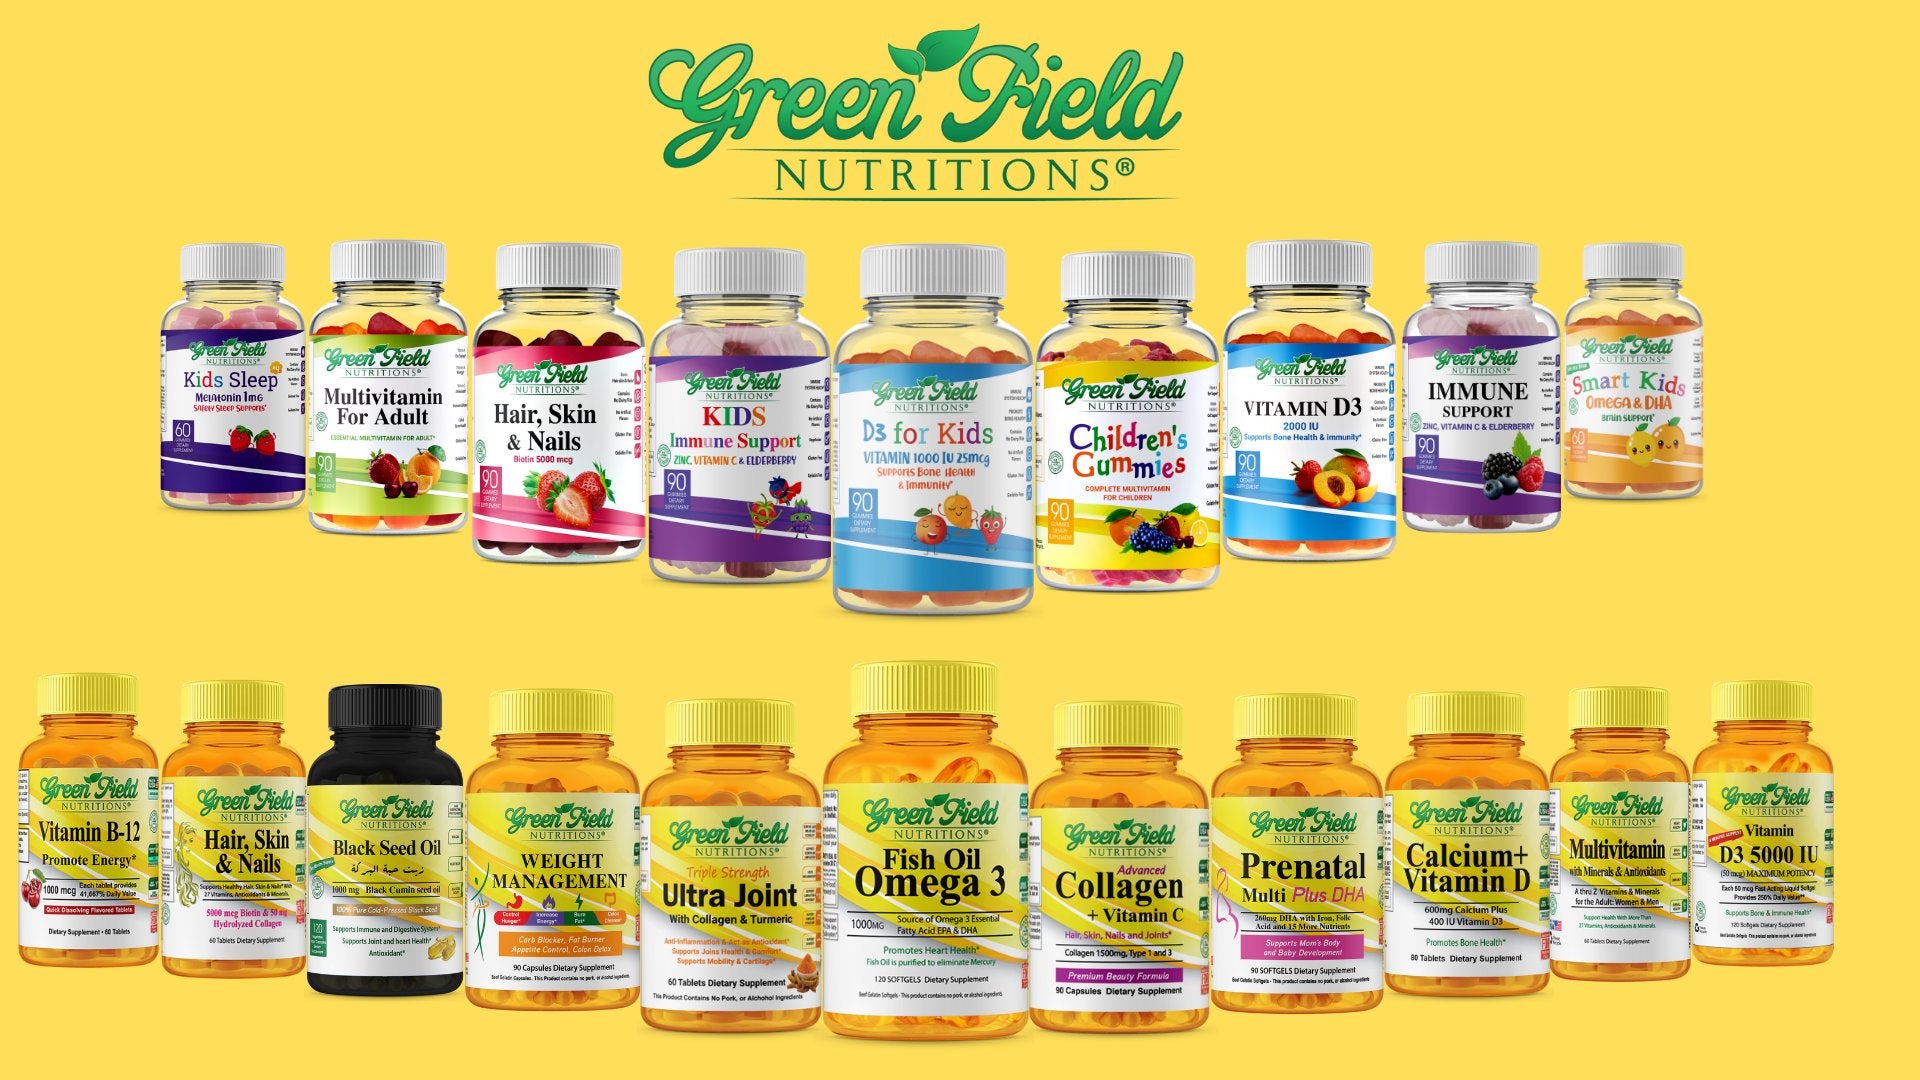 Greenfield Nutritions Halal Vitamins including Halal vitamins for kids Gummies and Halal vitamin for Adult Gummies